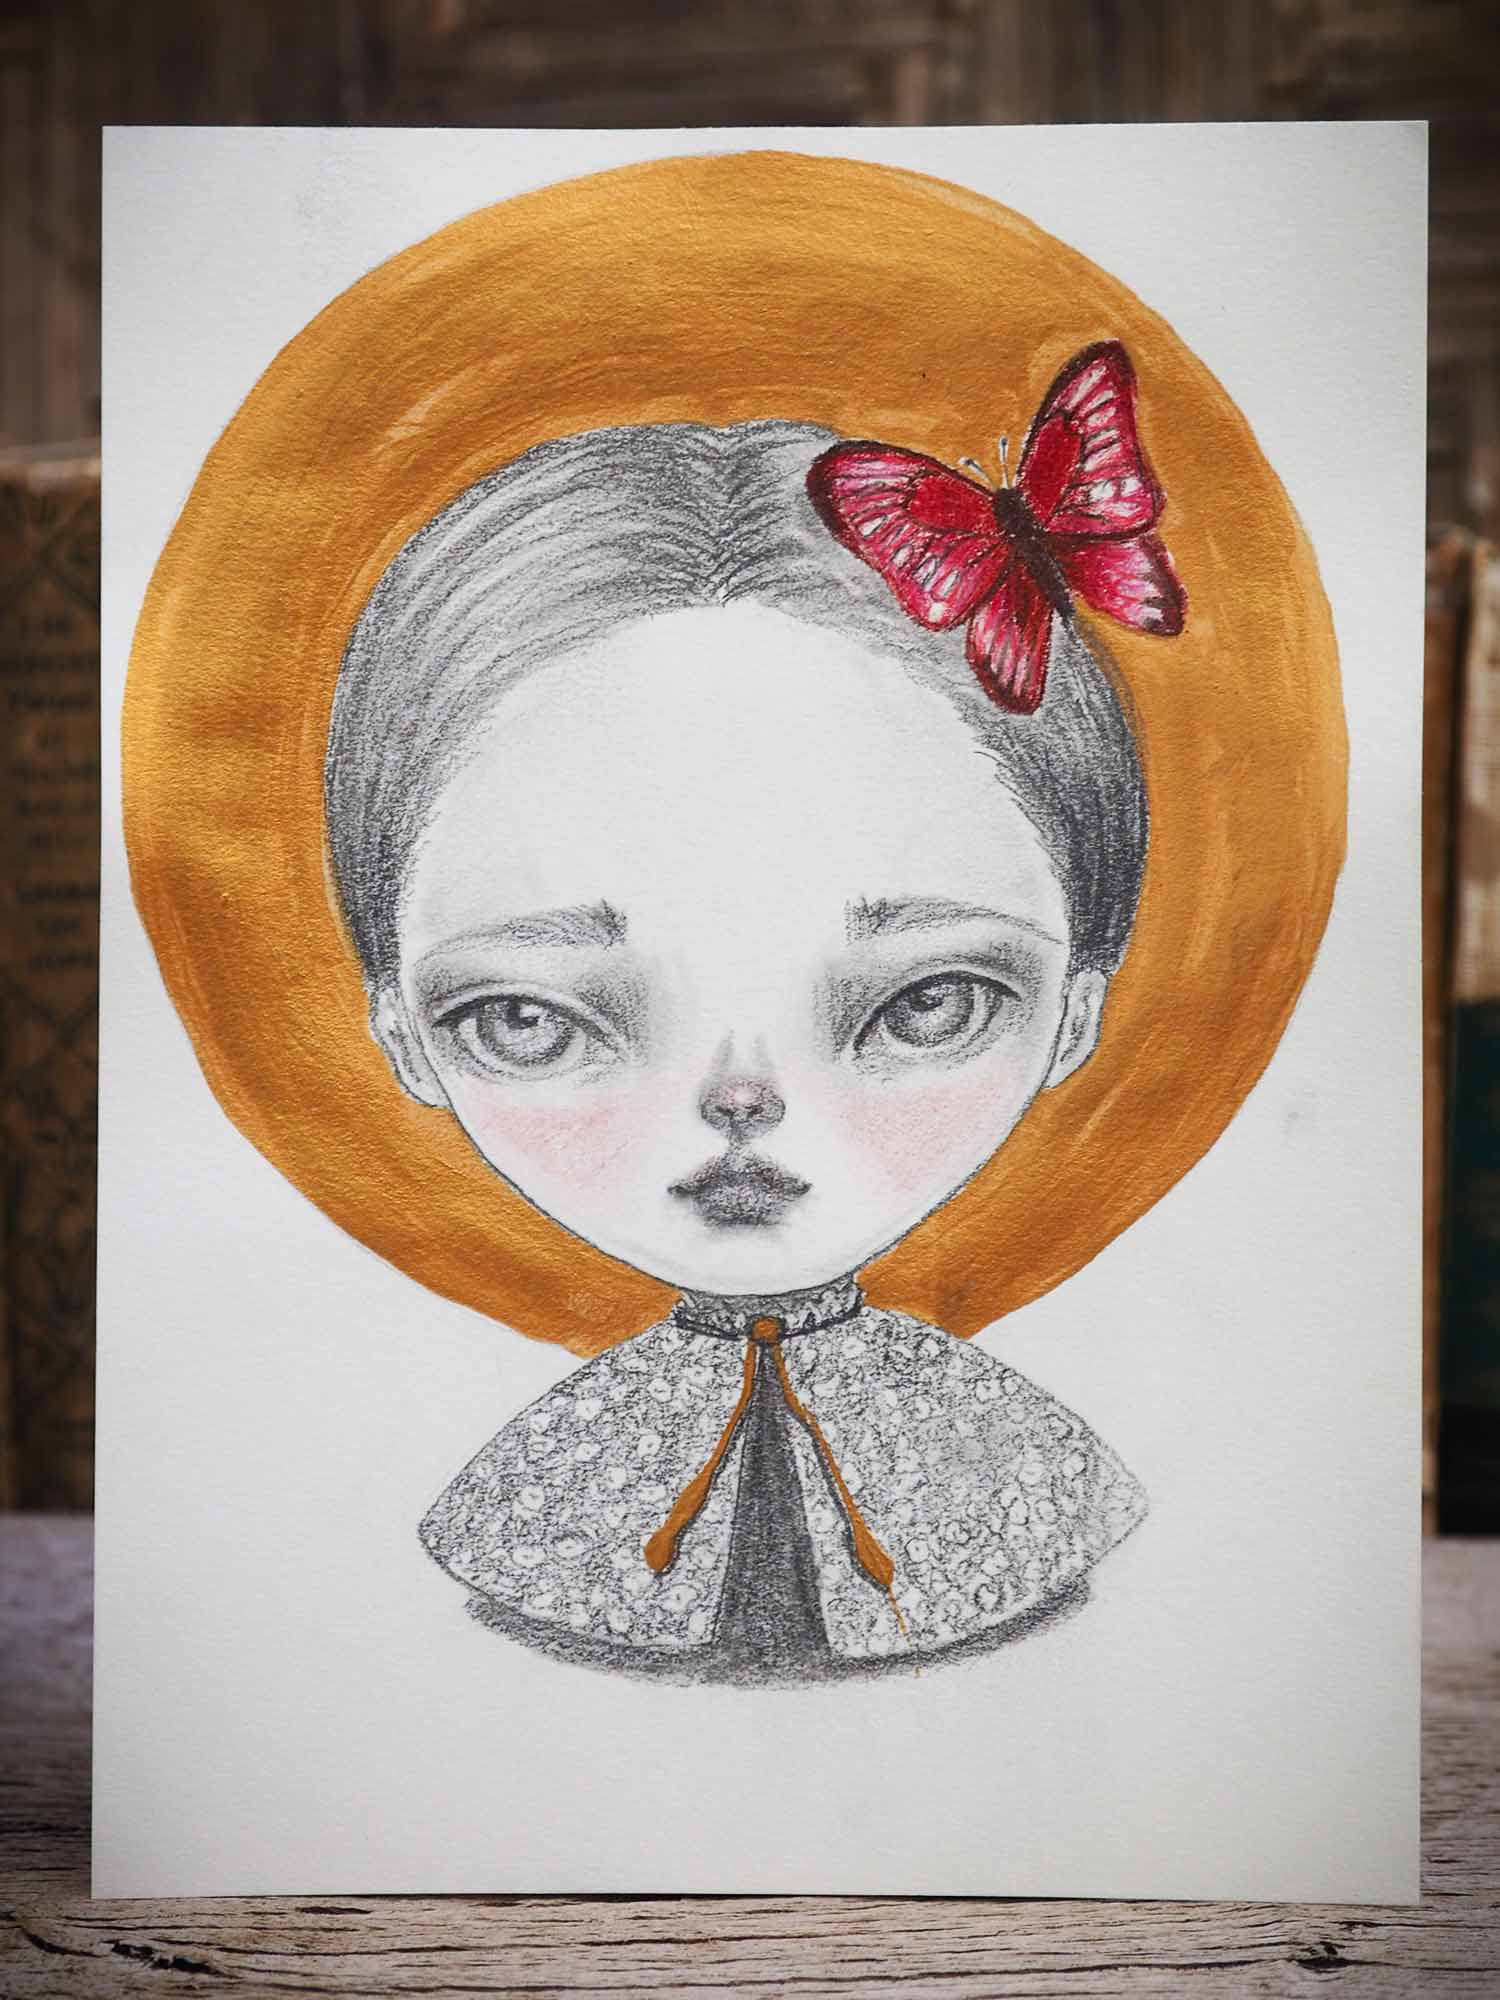 Original mixed media illustration in Pencil, watercolor, gouache and ink by Danita Art. A beautiful girl with deep mesmerizing and expressive eyes has a red butterfly perched on her head like a brooch.